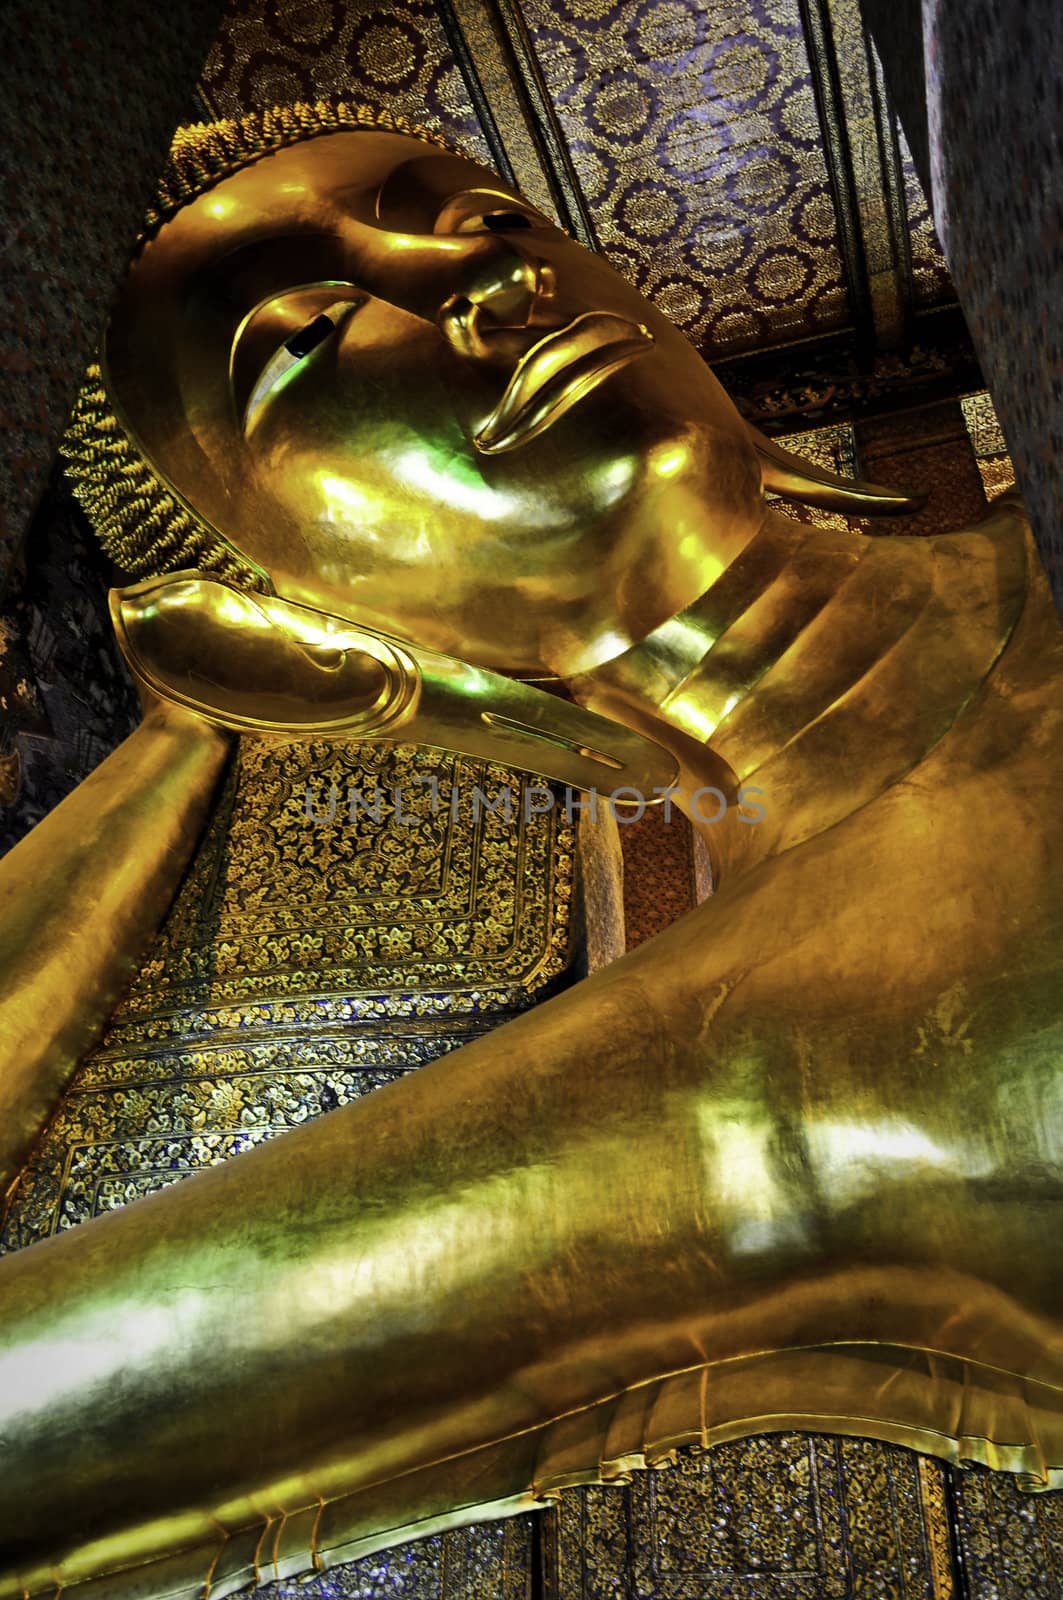 The large famous reclining buddha at a temple in Bangkok